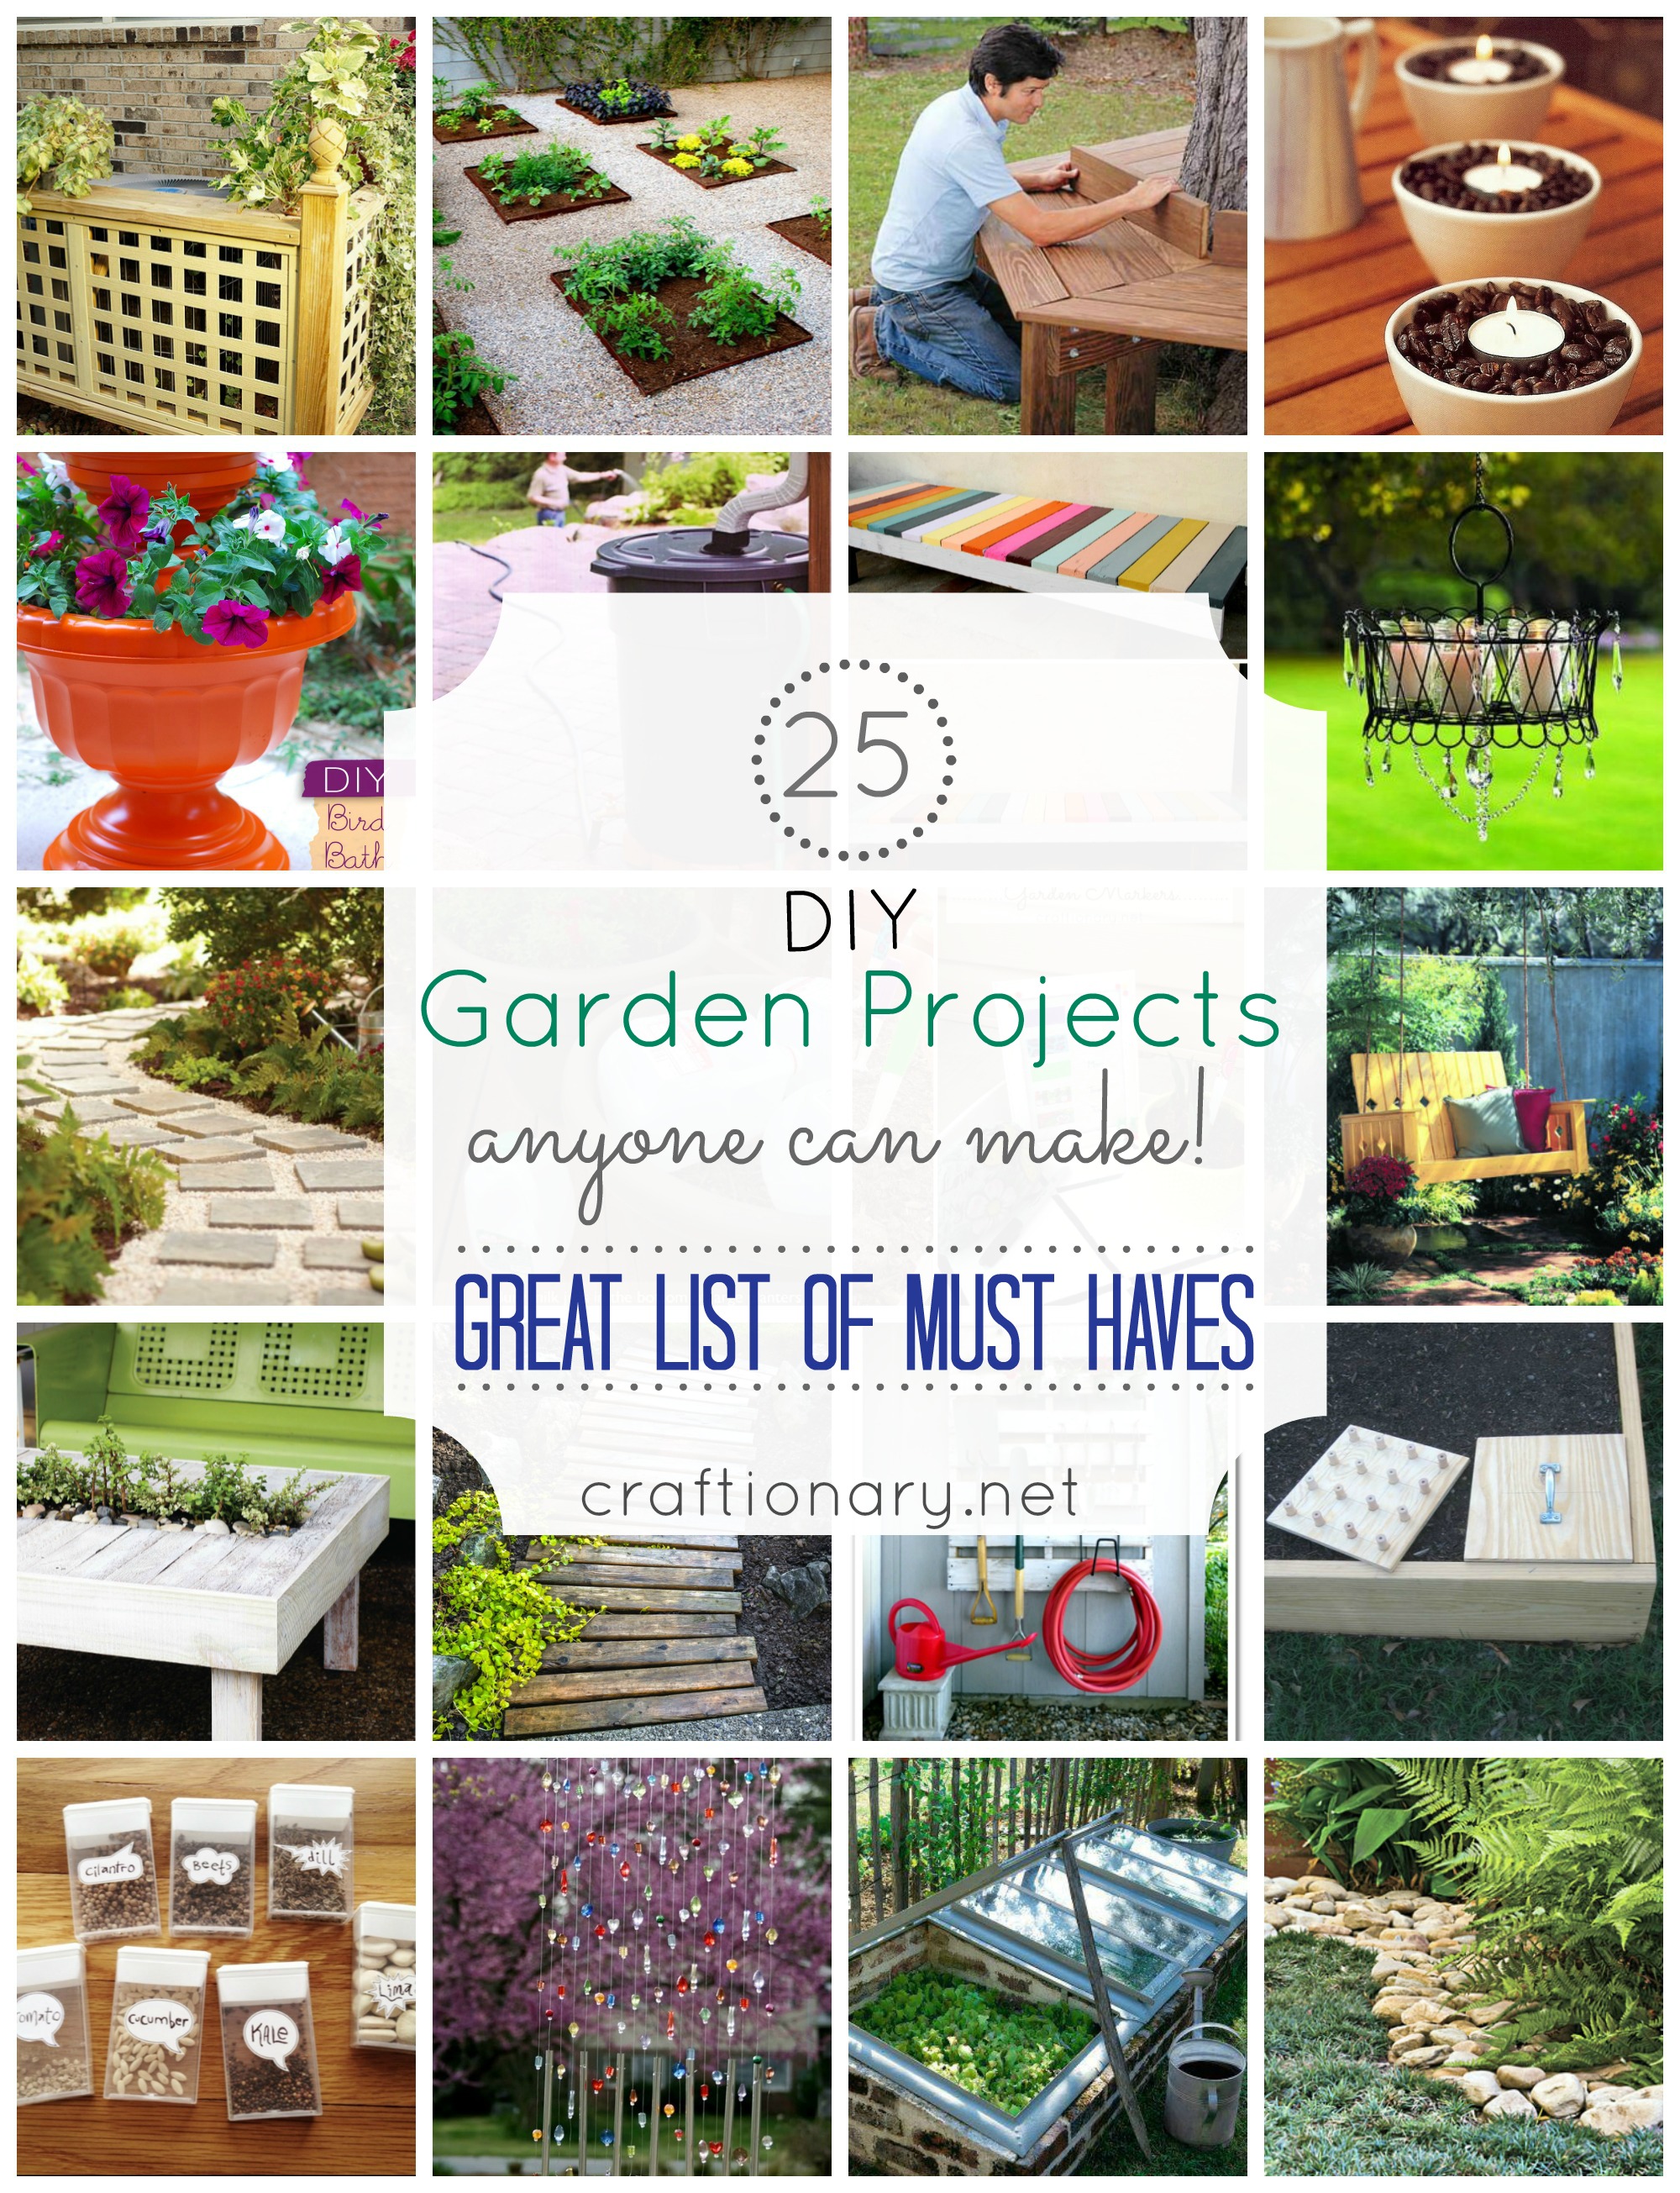 Intensively in containers diy garden craft ideas saves metre place &.